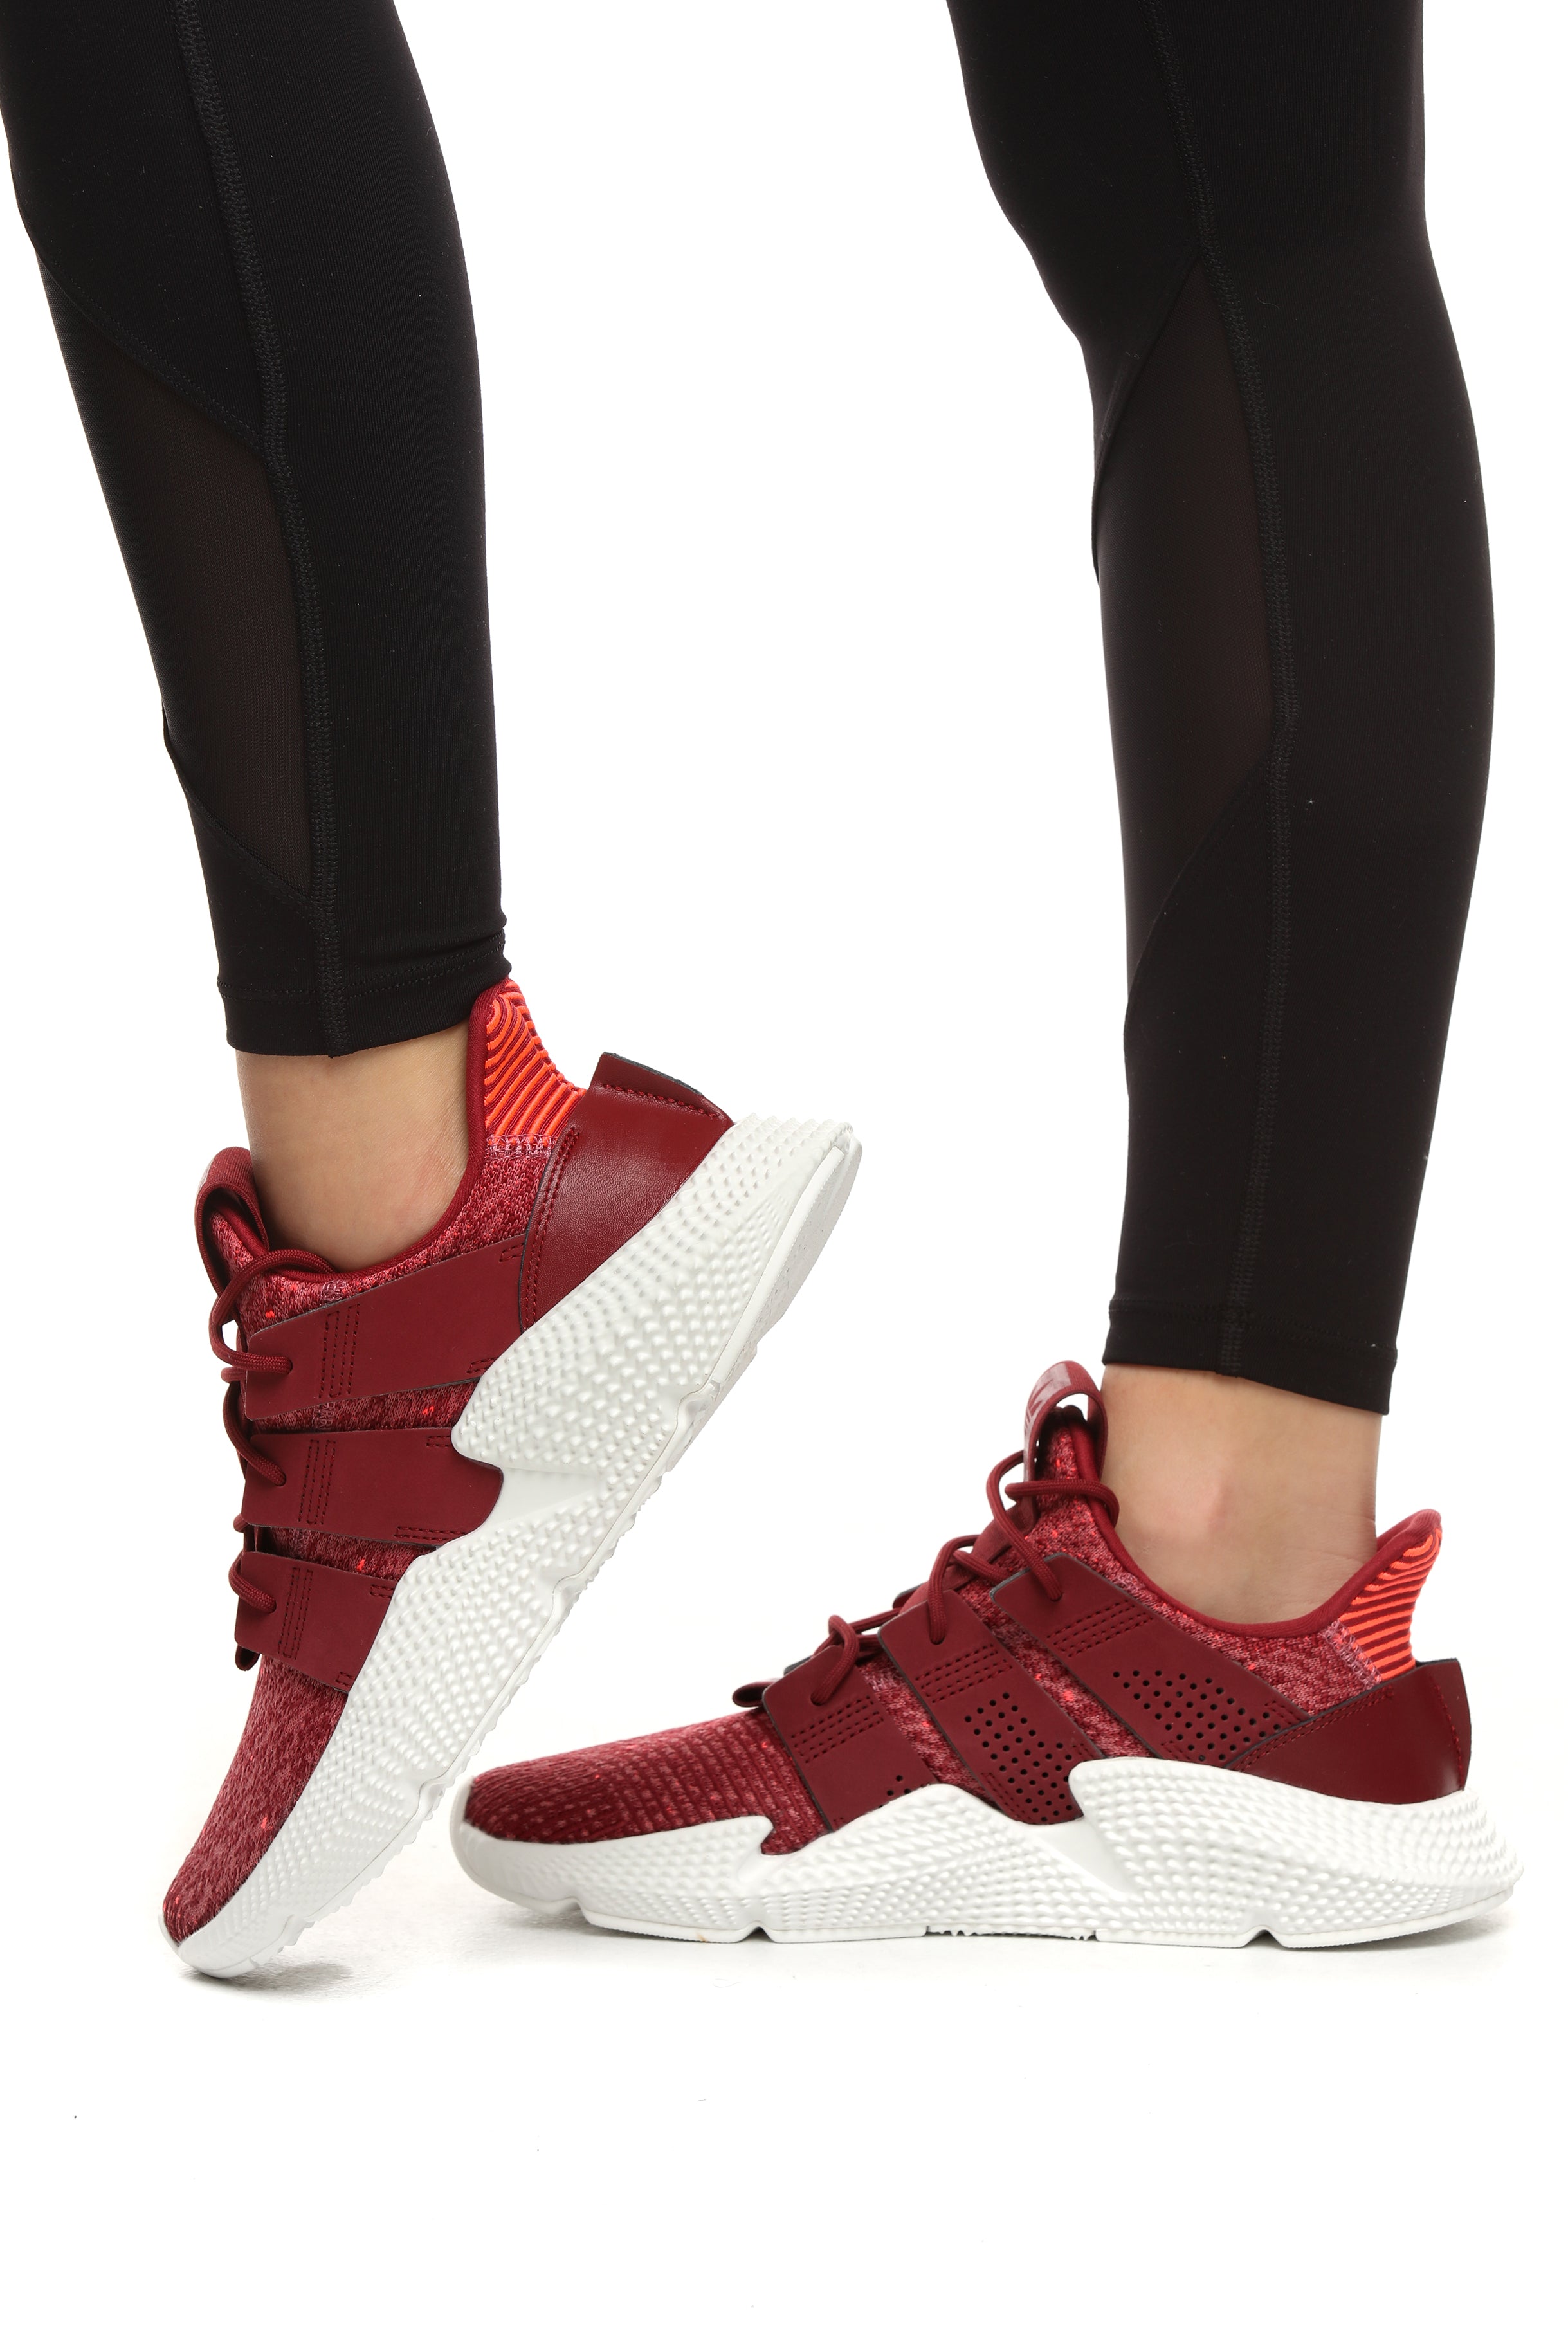 Adidas Women's Prophere Maroon/White | B37635 | Culture Kings US